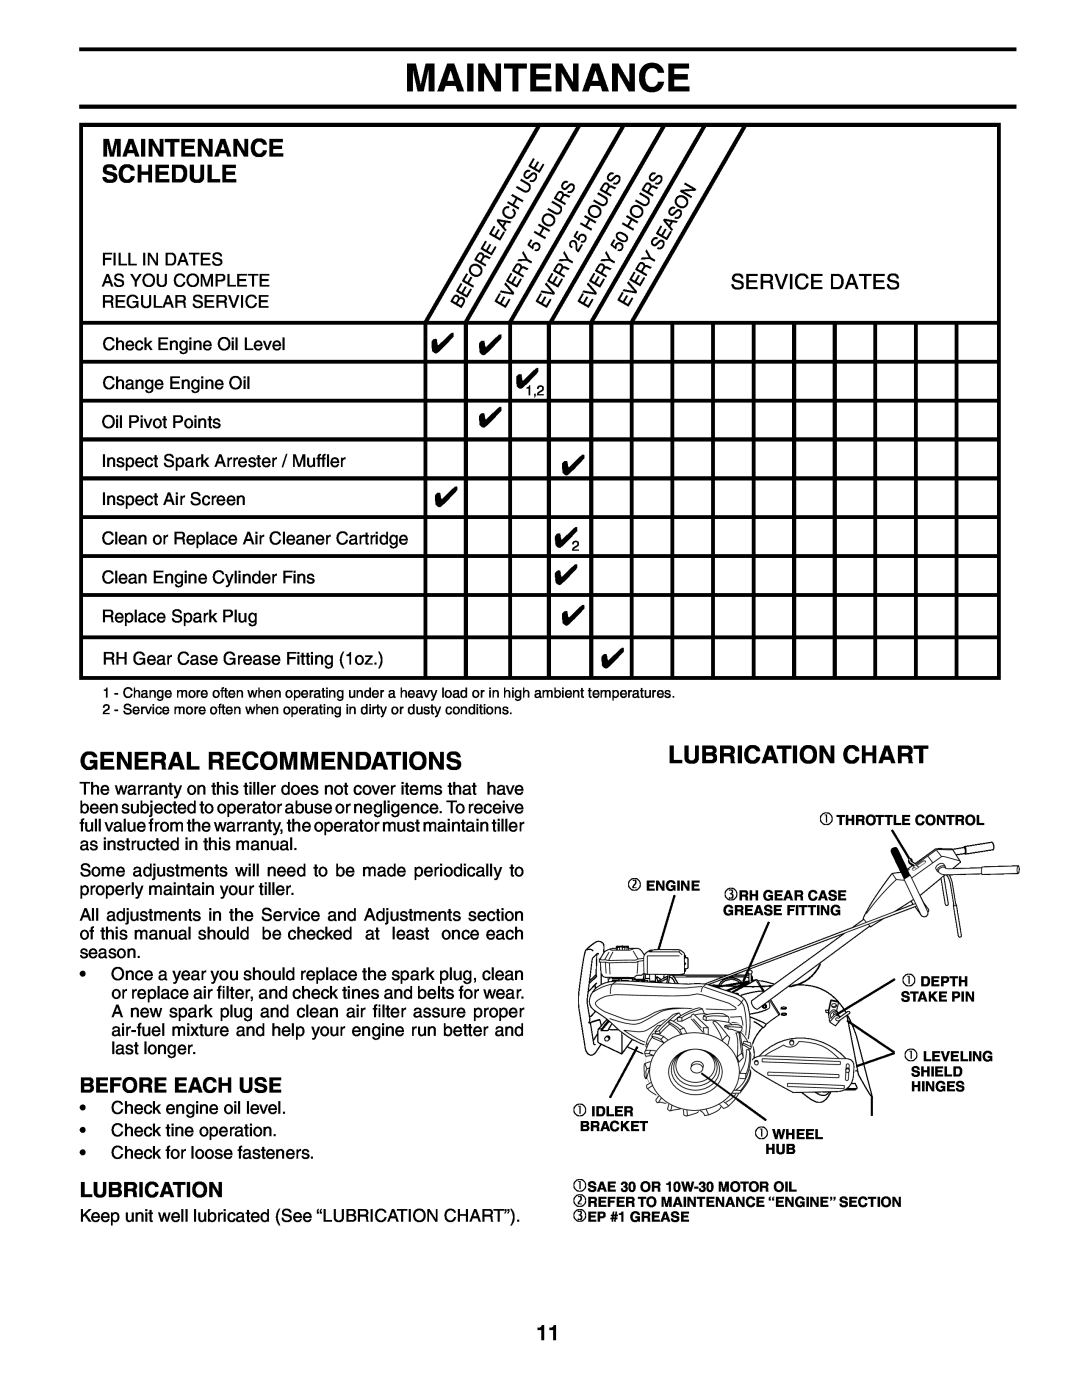 Poulan 184865 Maintenance Schedule, General Recommendations, Lubrication Chart, Before Each Use, Service Dates 